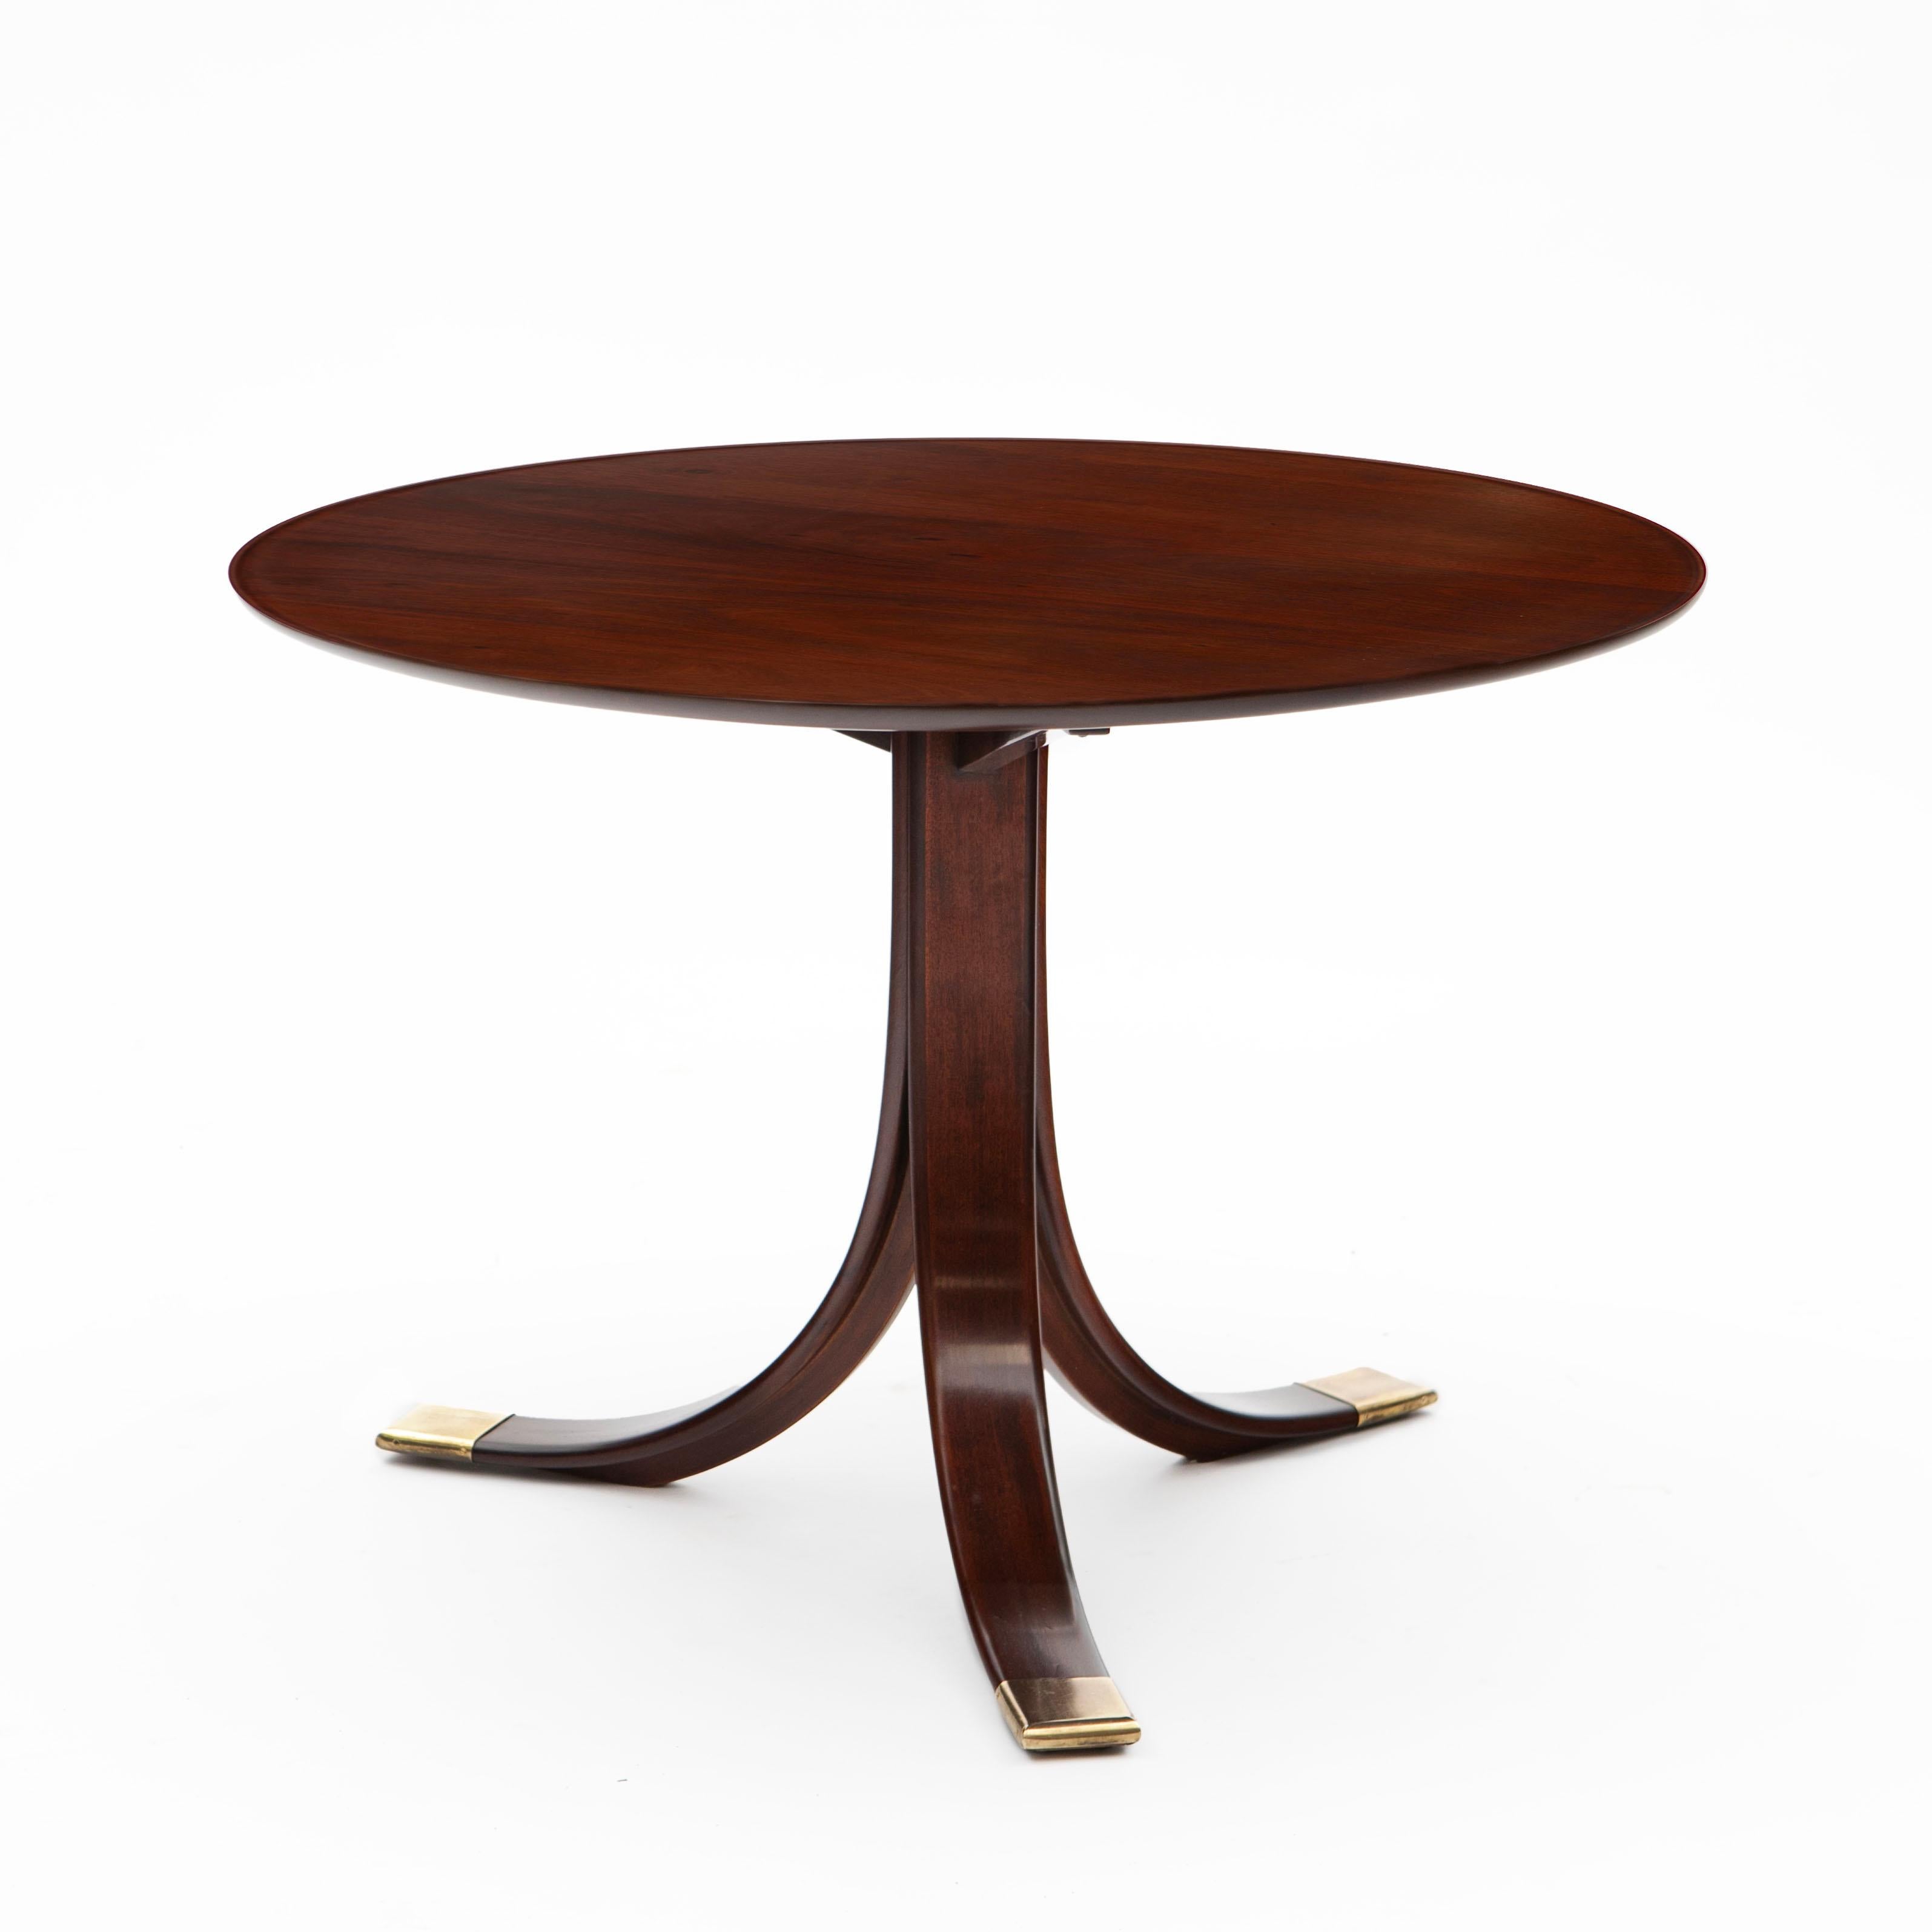 Frits Henningsen, Danish 1889-1965.

Circular pedestal coffee table in solid mahogany. Table top with beautiful grain and fluted edge. Resting on tripod foot ending in brass shoes.

Designed and produced in by cabinetmaker Frits Henningsen at his